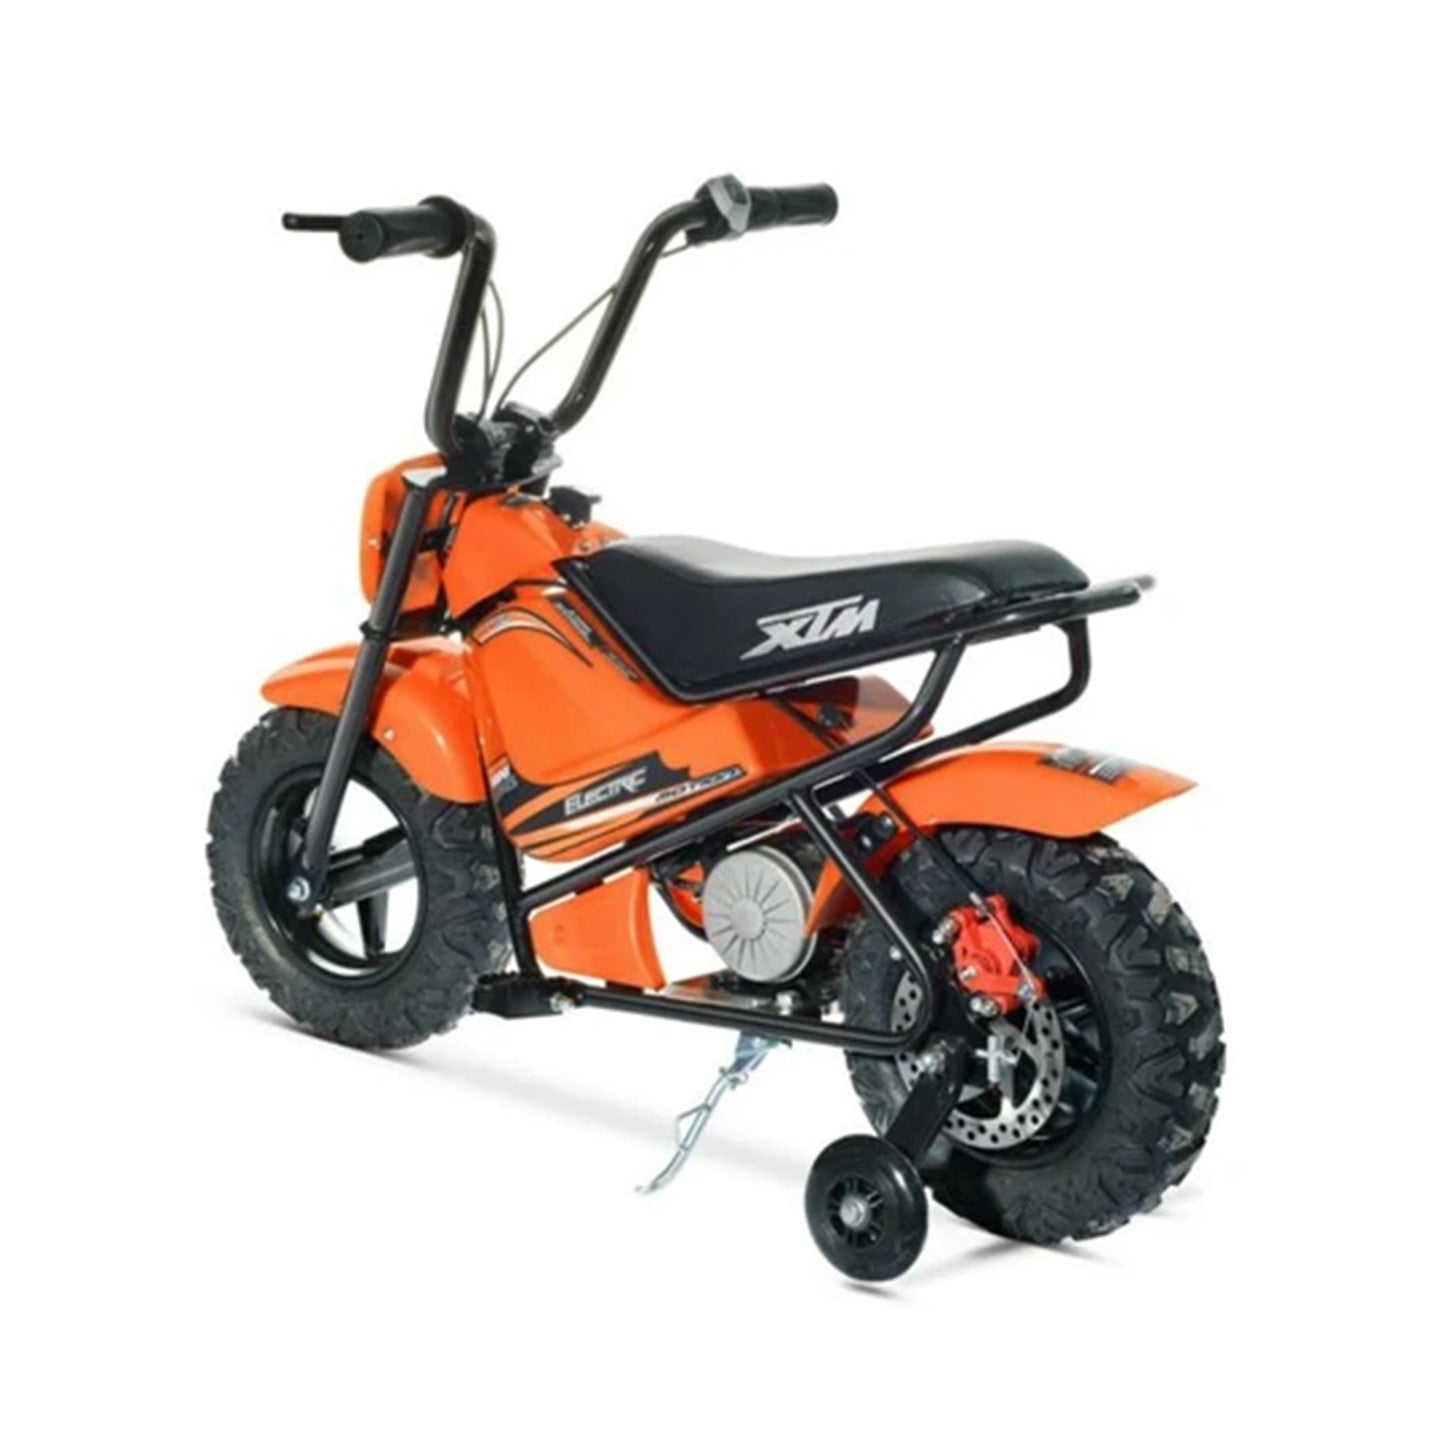 "Orange Mini Electric Dirtbike Scrambler with Twist and Go Throttle, suitable for Kids, 12 Volt"